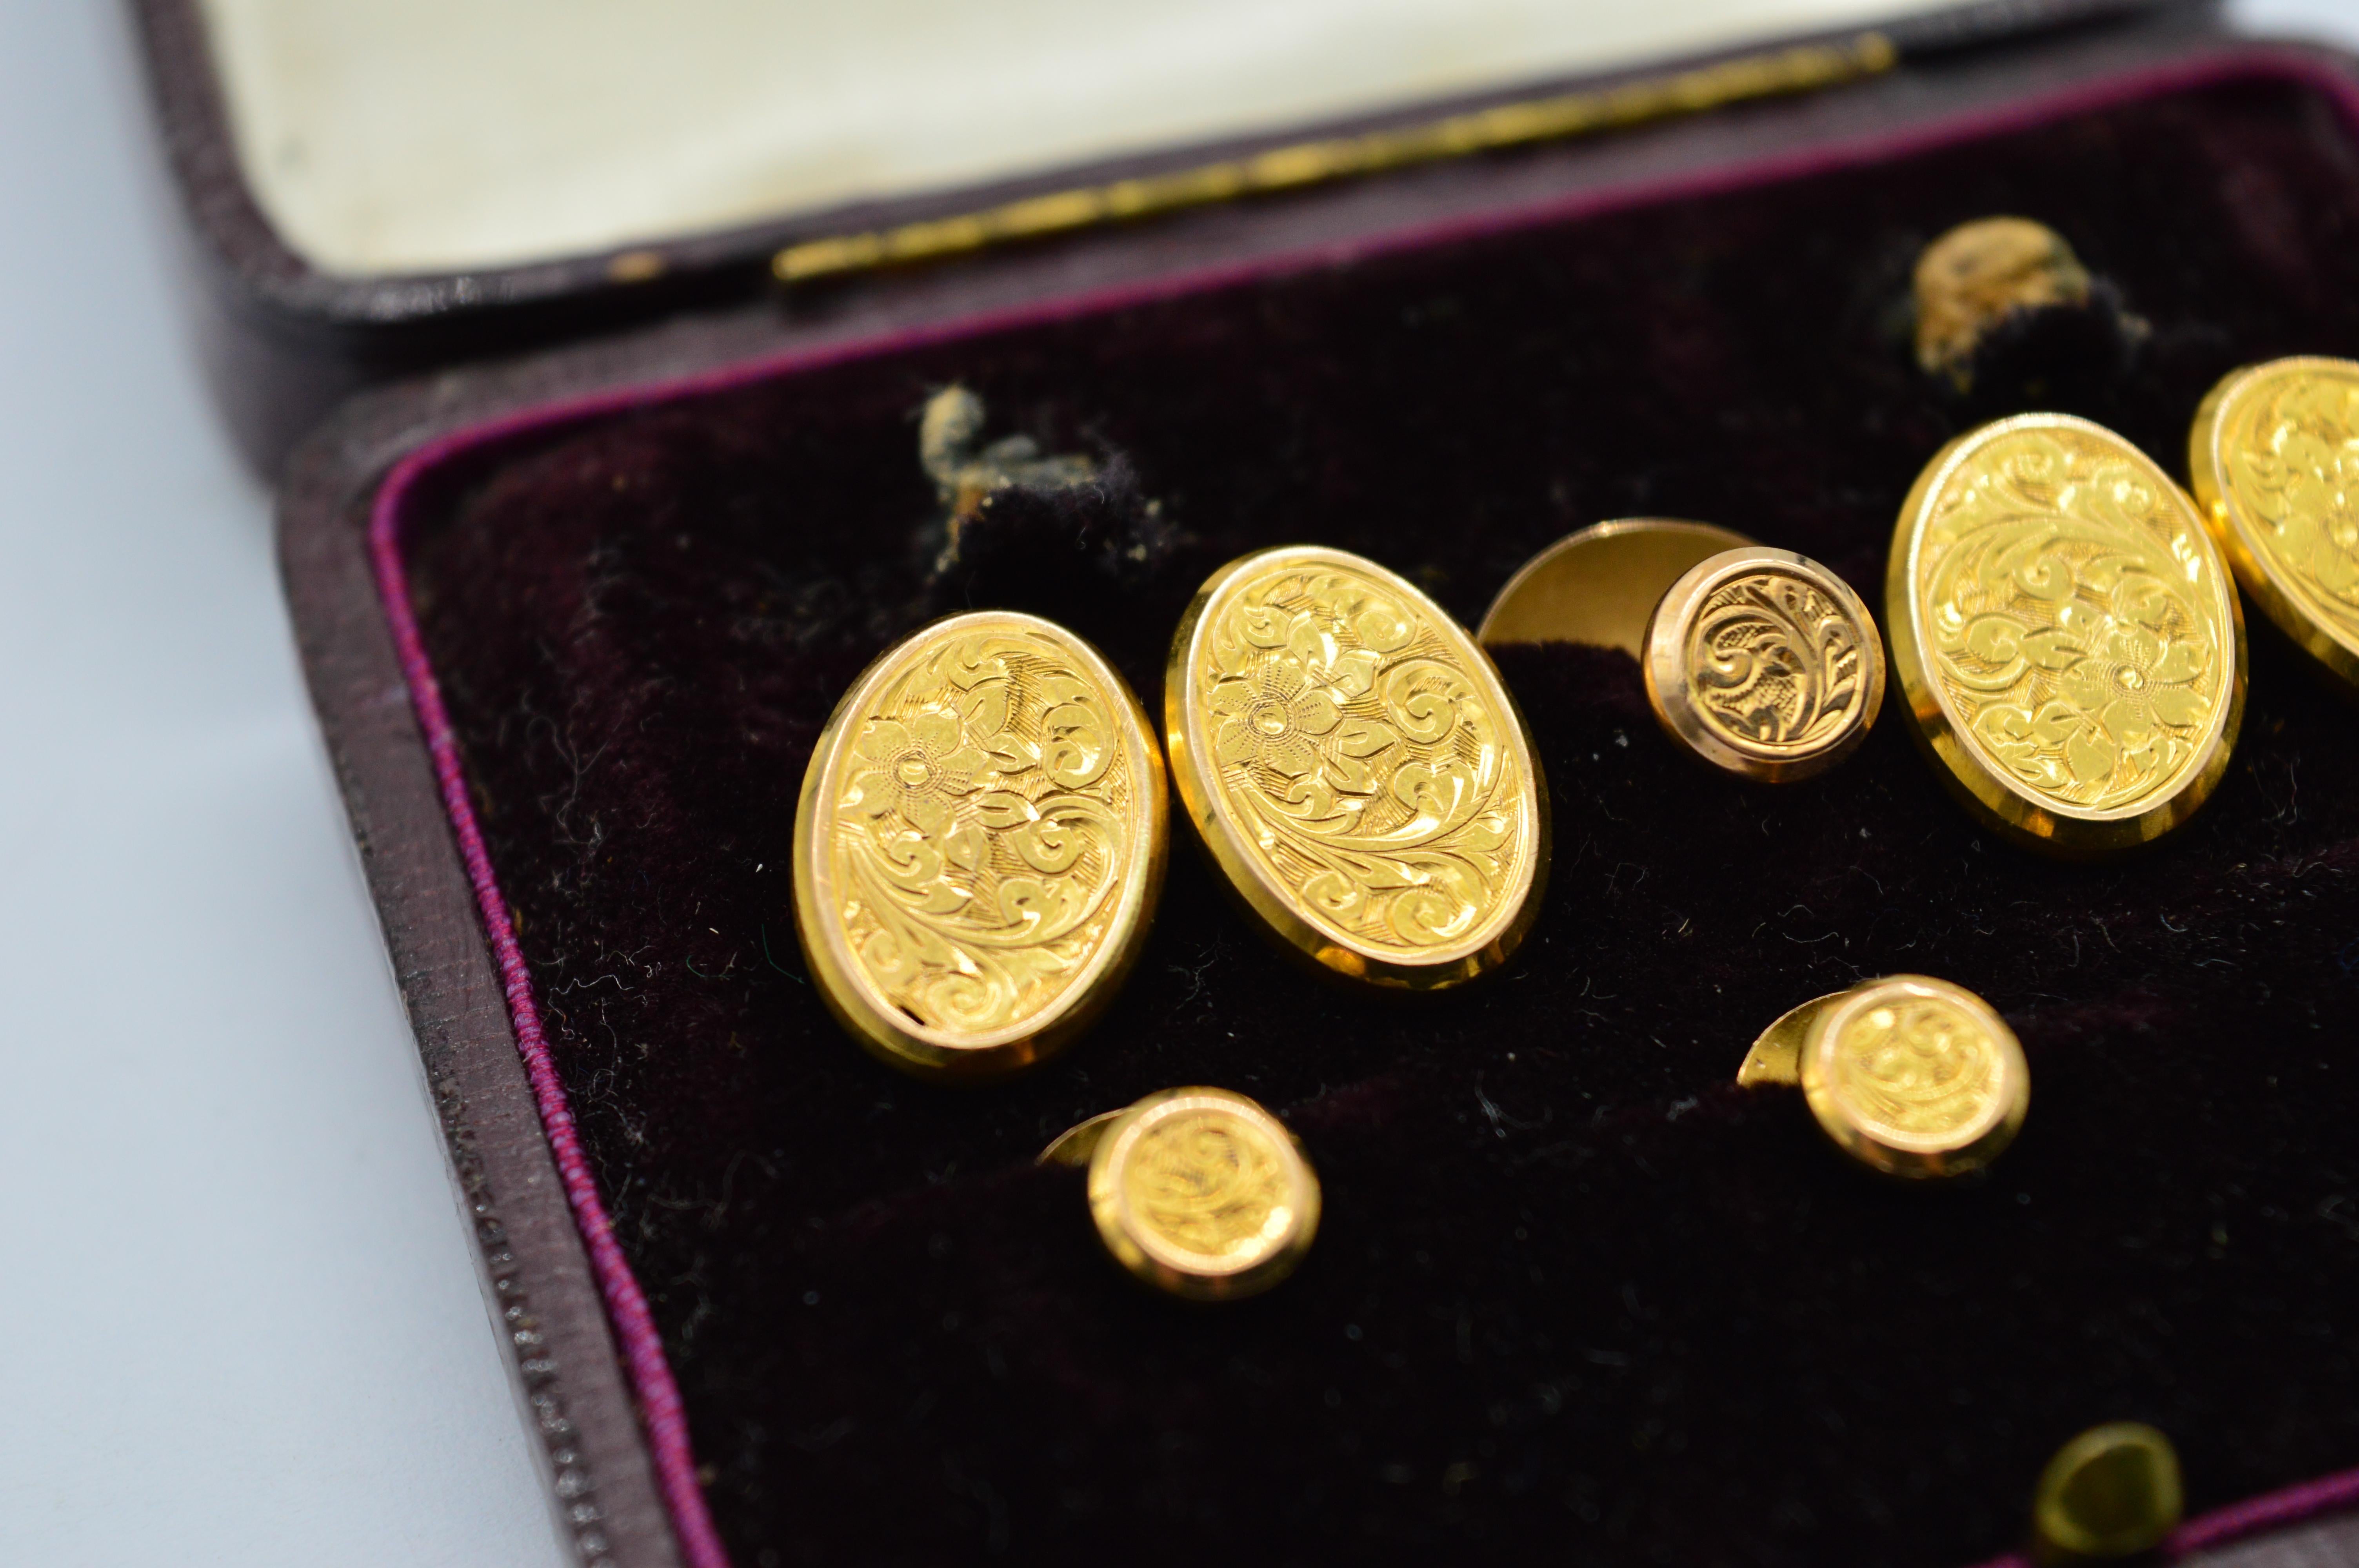 A set of boxed 9ct yellow gold Victorian cufflinks with stud set in the original box 

Made in Birmingham and sold by the Georg Jenson company (not made by them)

6.38g

We have sold to the set of Hit shows like Peaky Blinders and Outlander as well